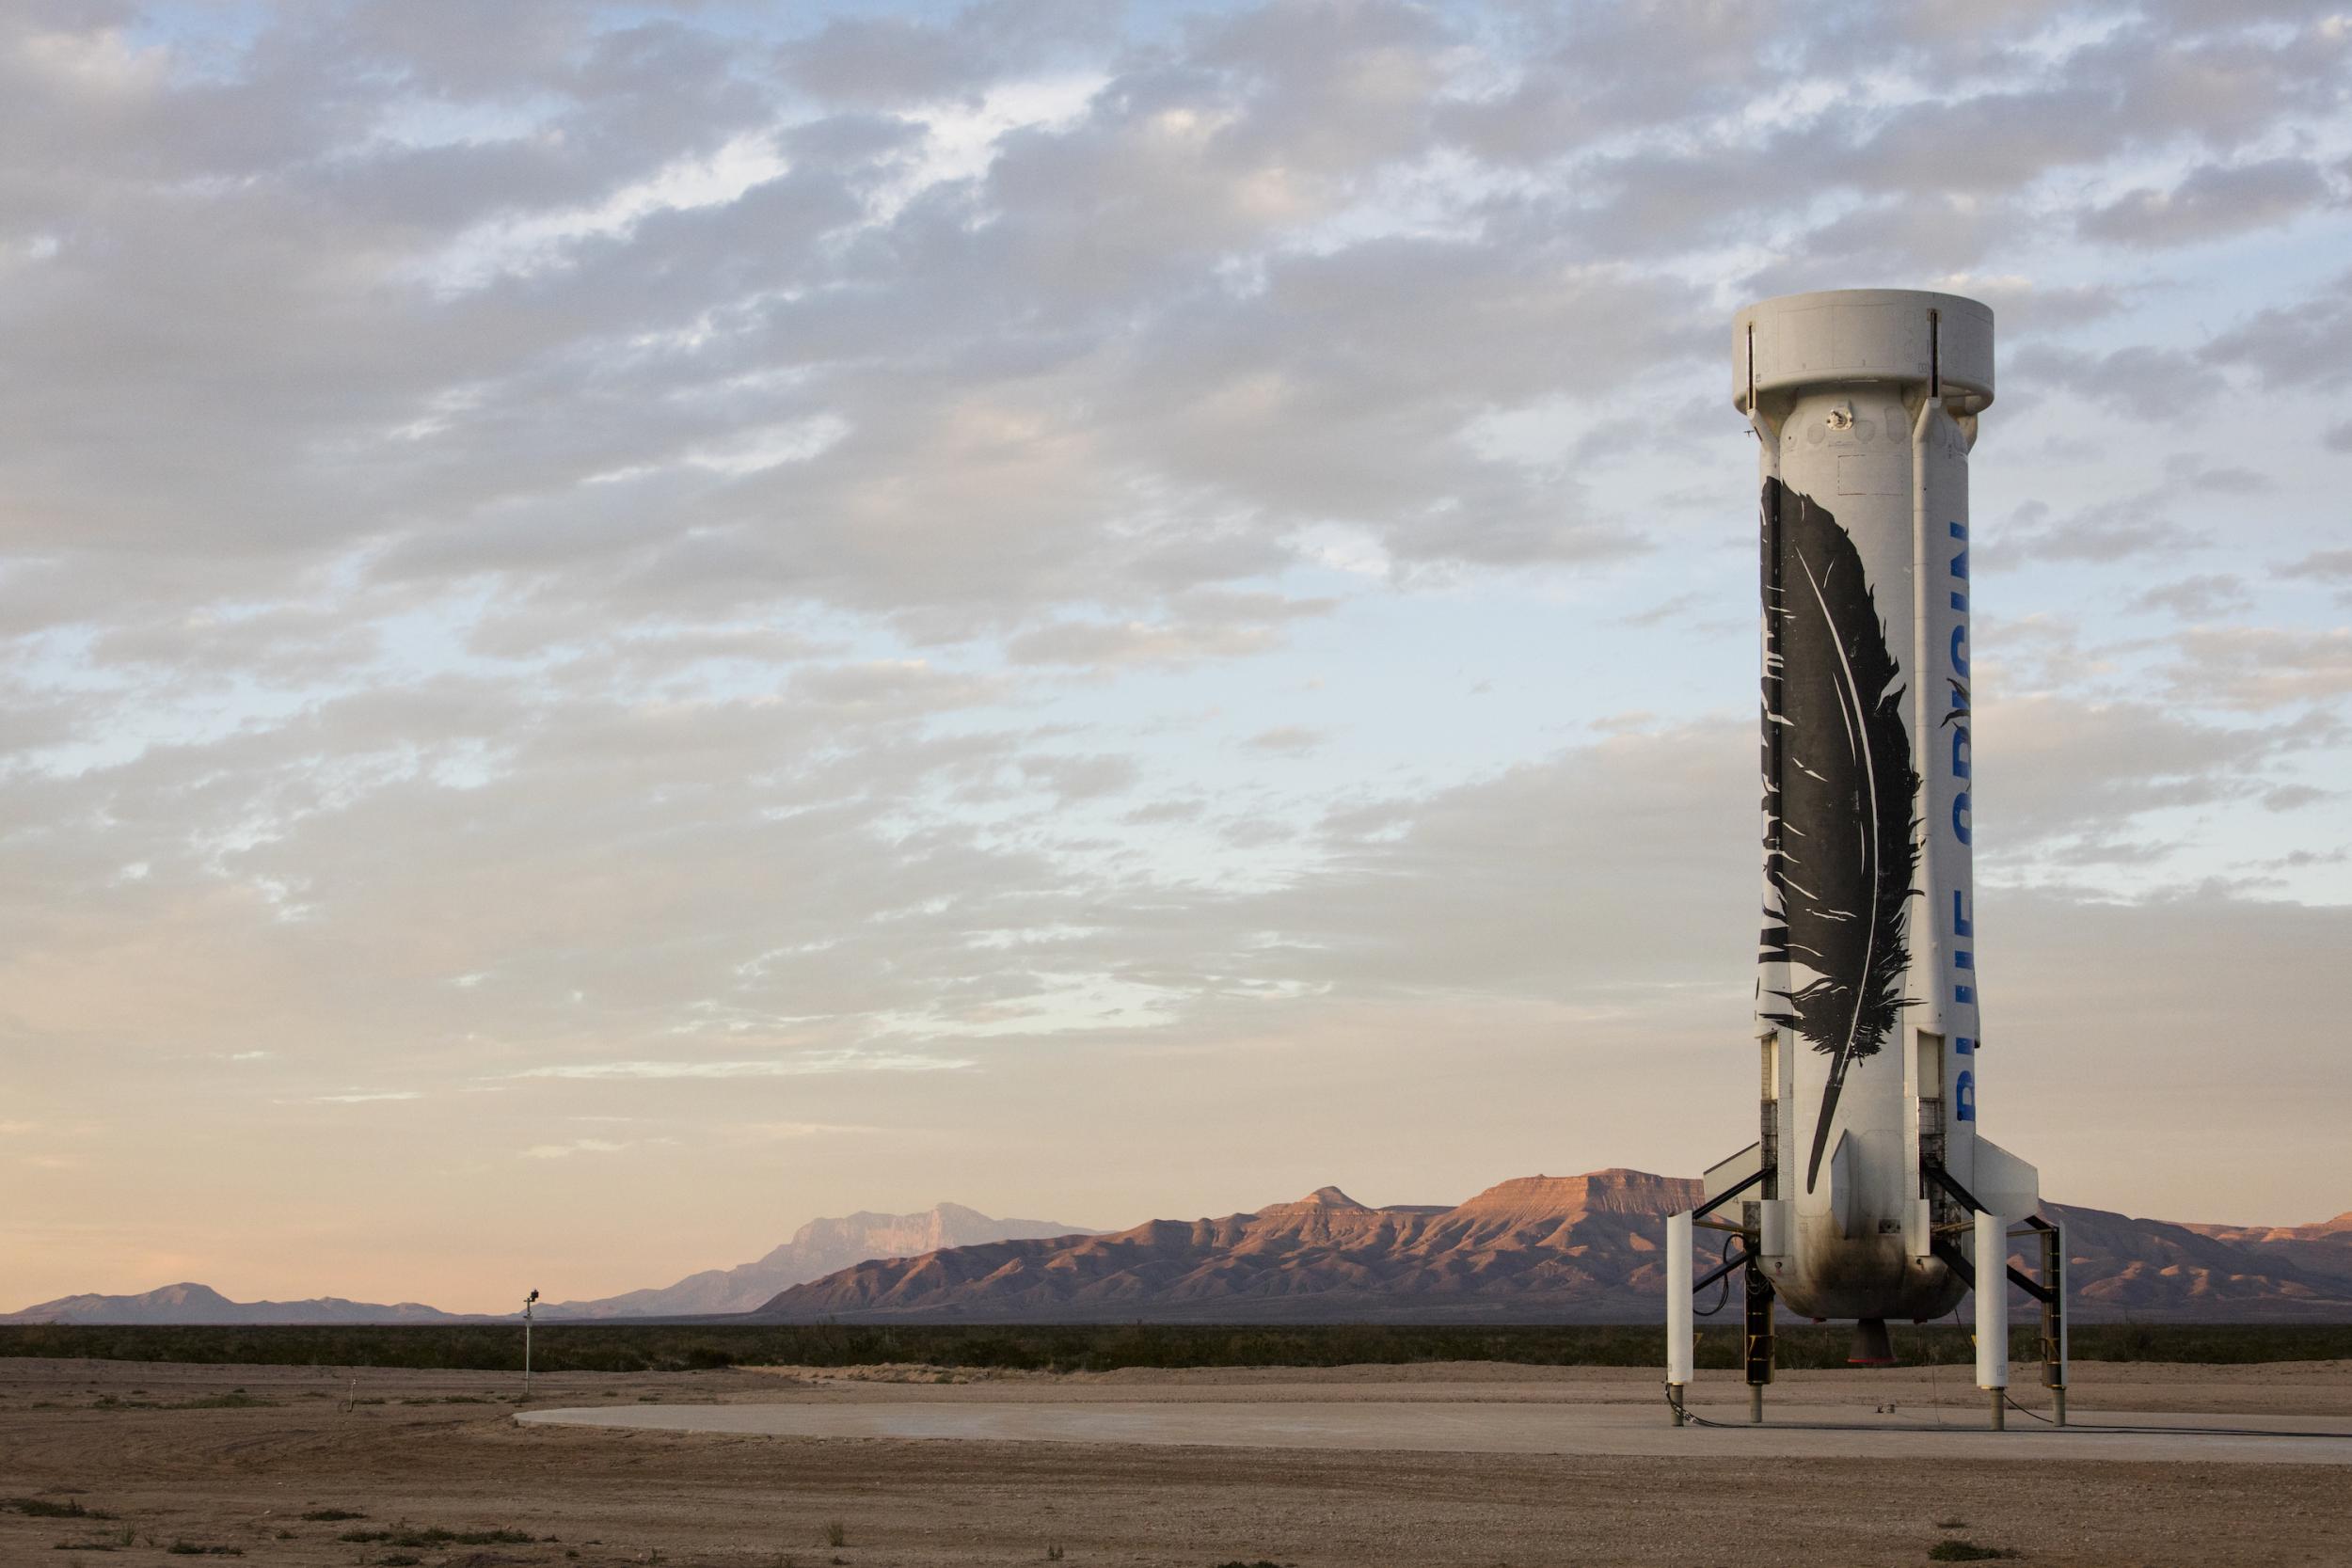 The New Shepard booster shortly after landing safely back on Earth